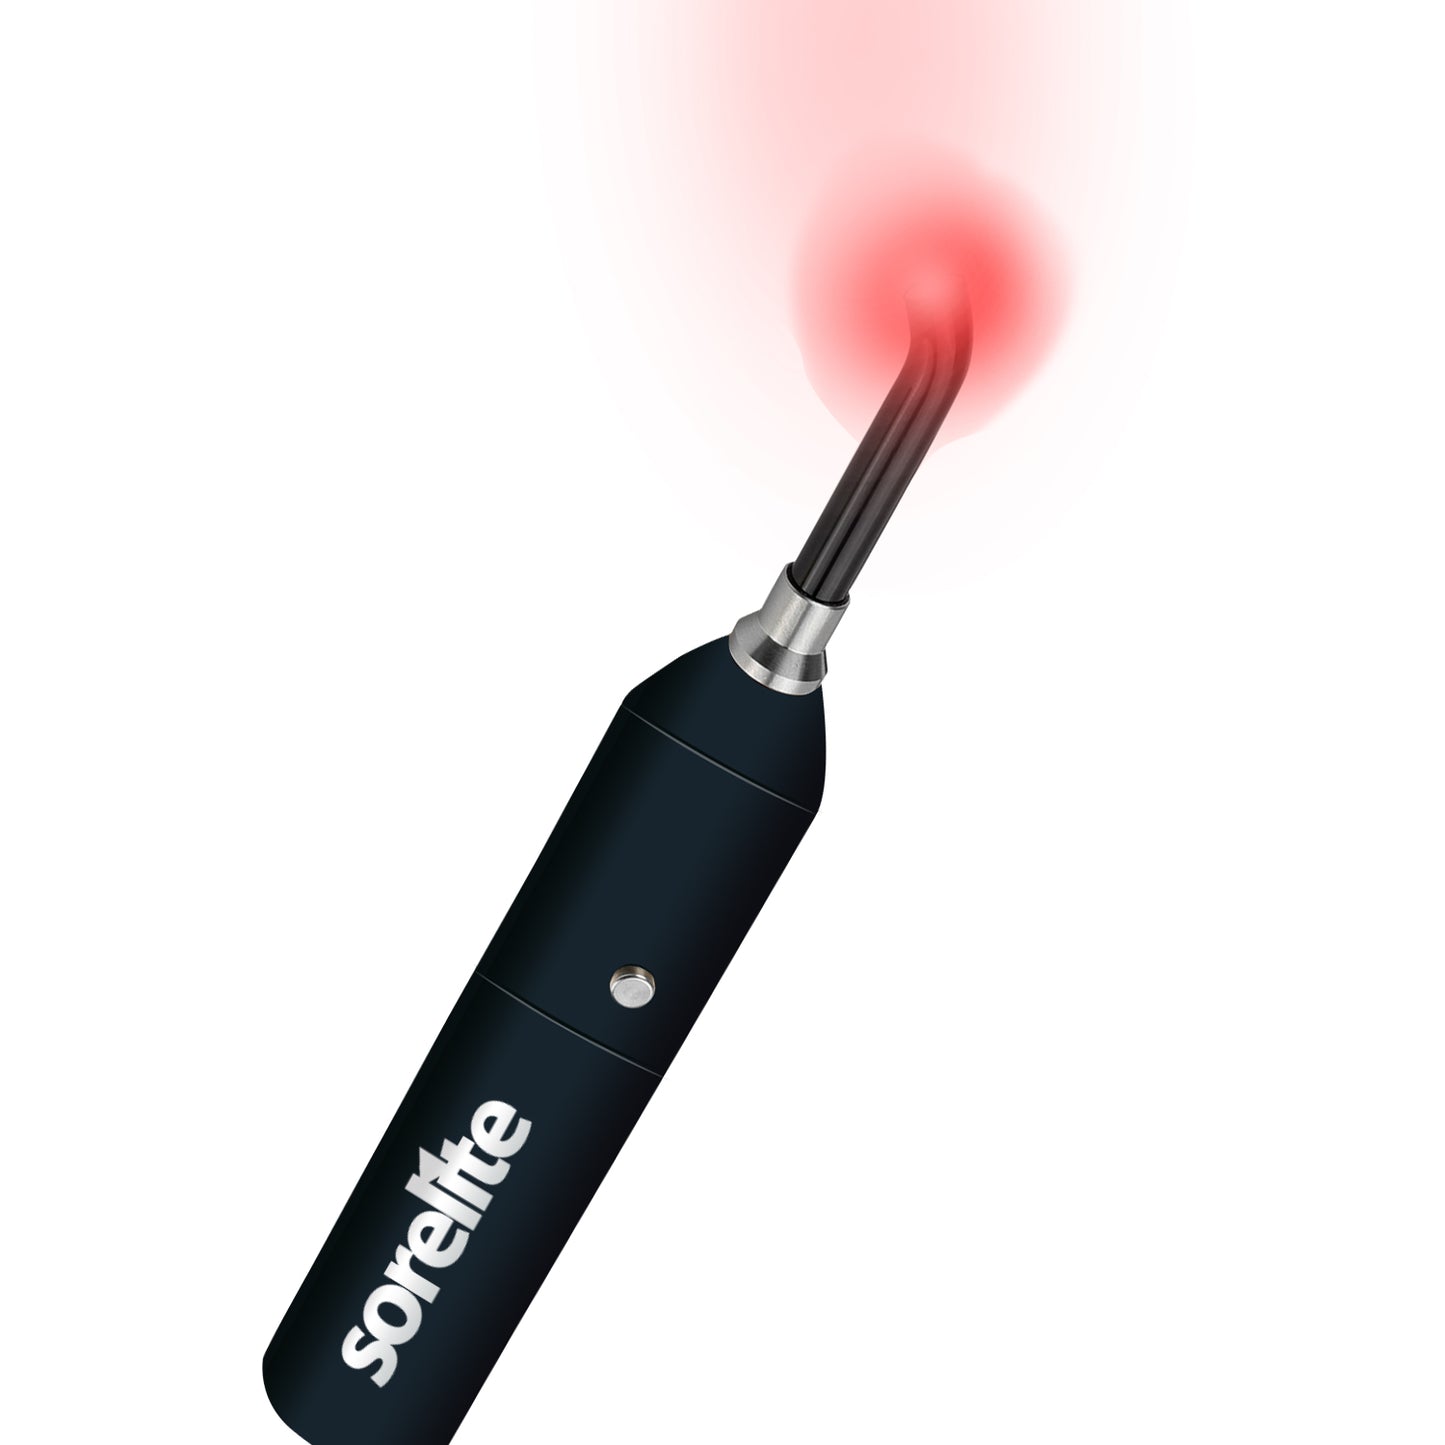 Red Light Therapy for Cold Sore and Canker Sore by Sorelite, Proven Cold Sore Device for Pain Relief and Lip Sore Management; Blue light and Near Infrared LED focused to clean and rejuvenate tissue.